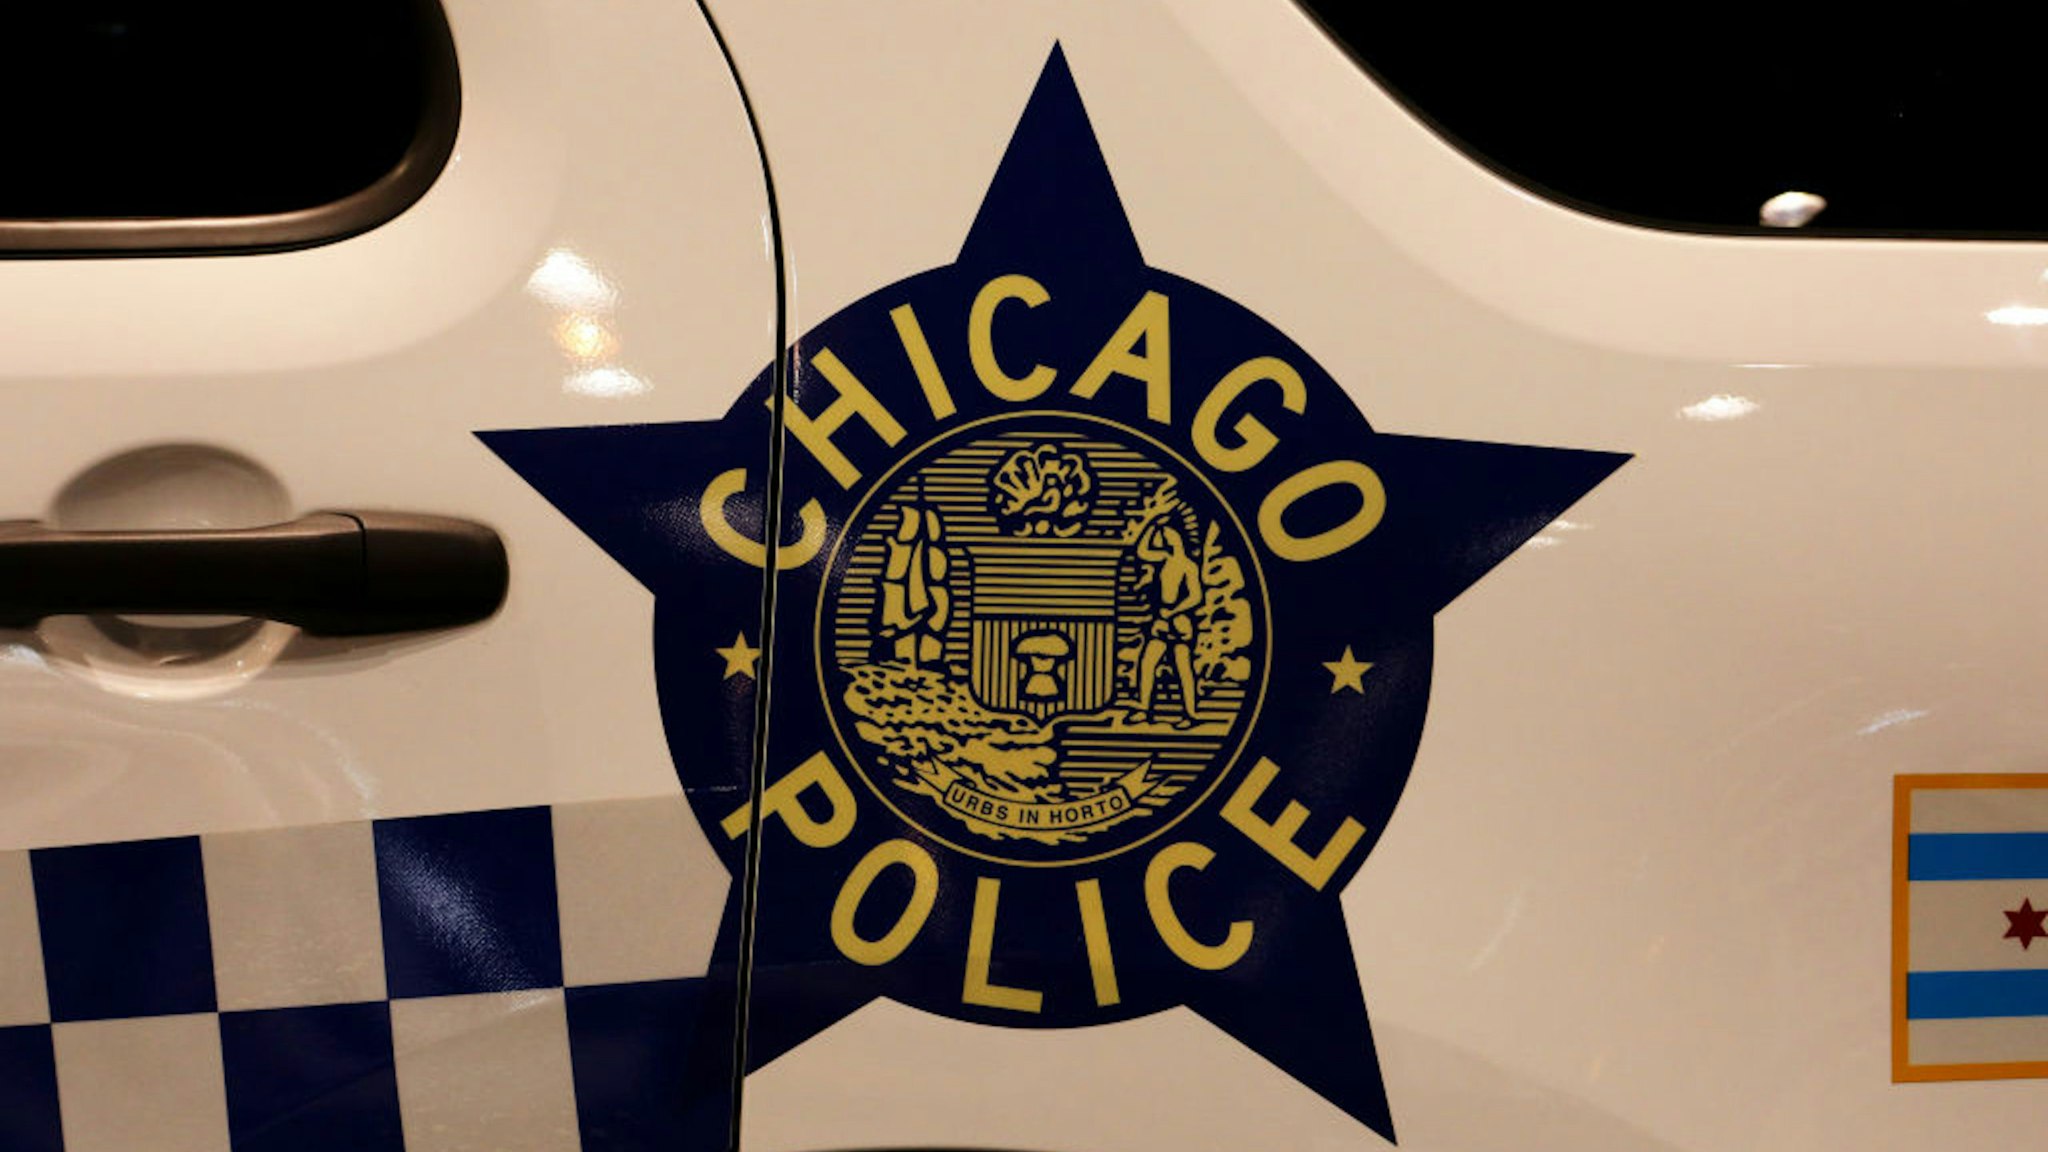 CHICAGO - FEBRUARY 06: A Chicago Police decal on a Chicago Police vehicle is on display at the 112th Annual Chicago Auto Show at McCormick Place in Chicago, Illinois on February 6, 2020.